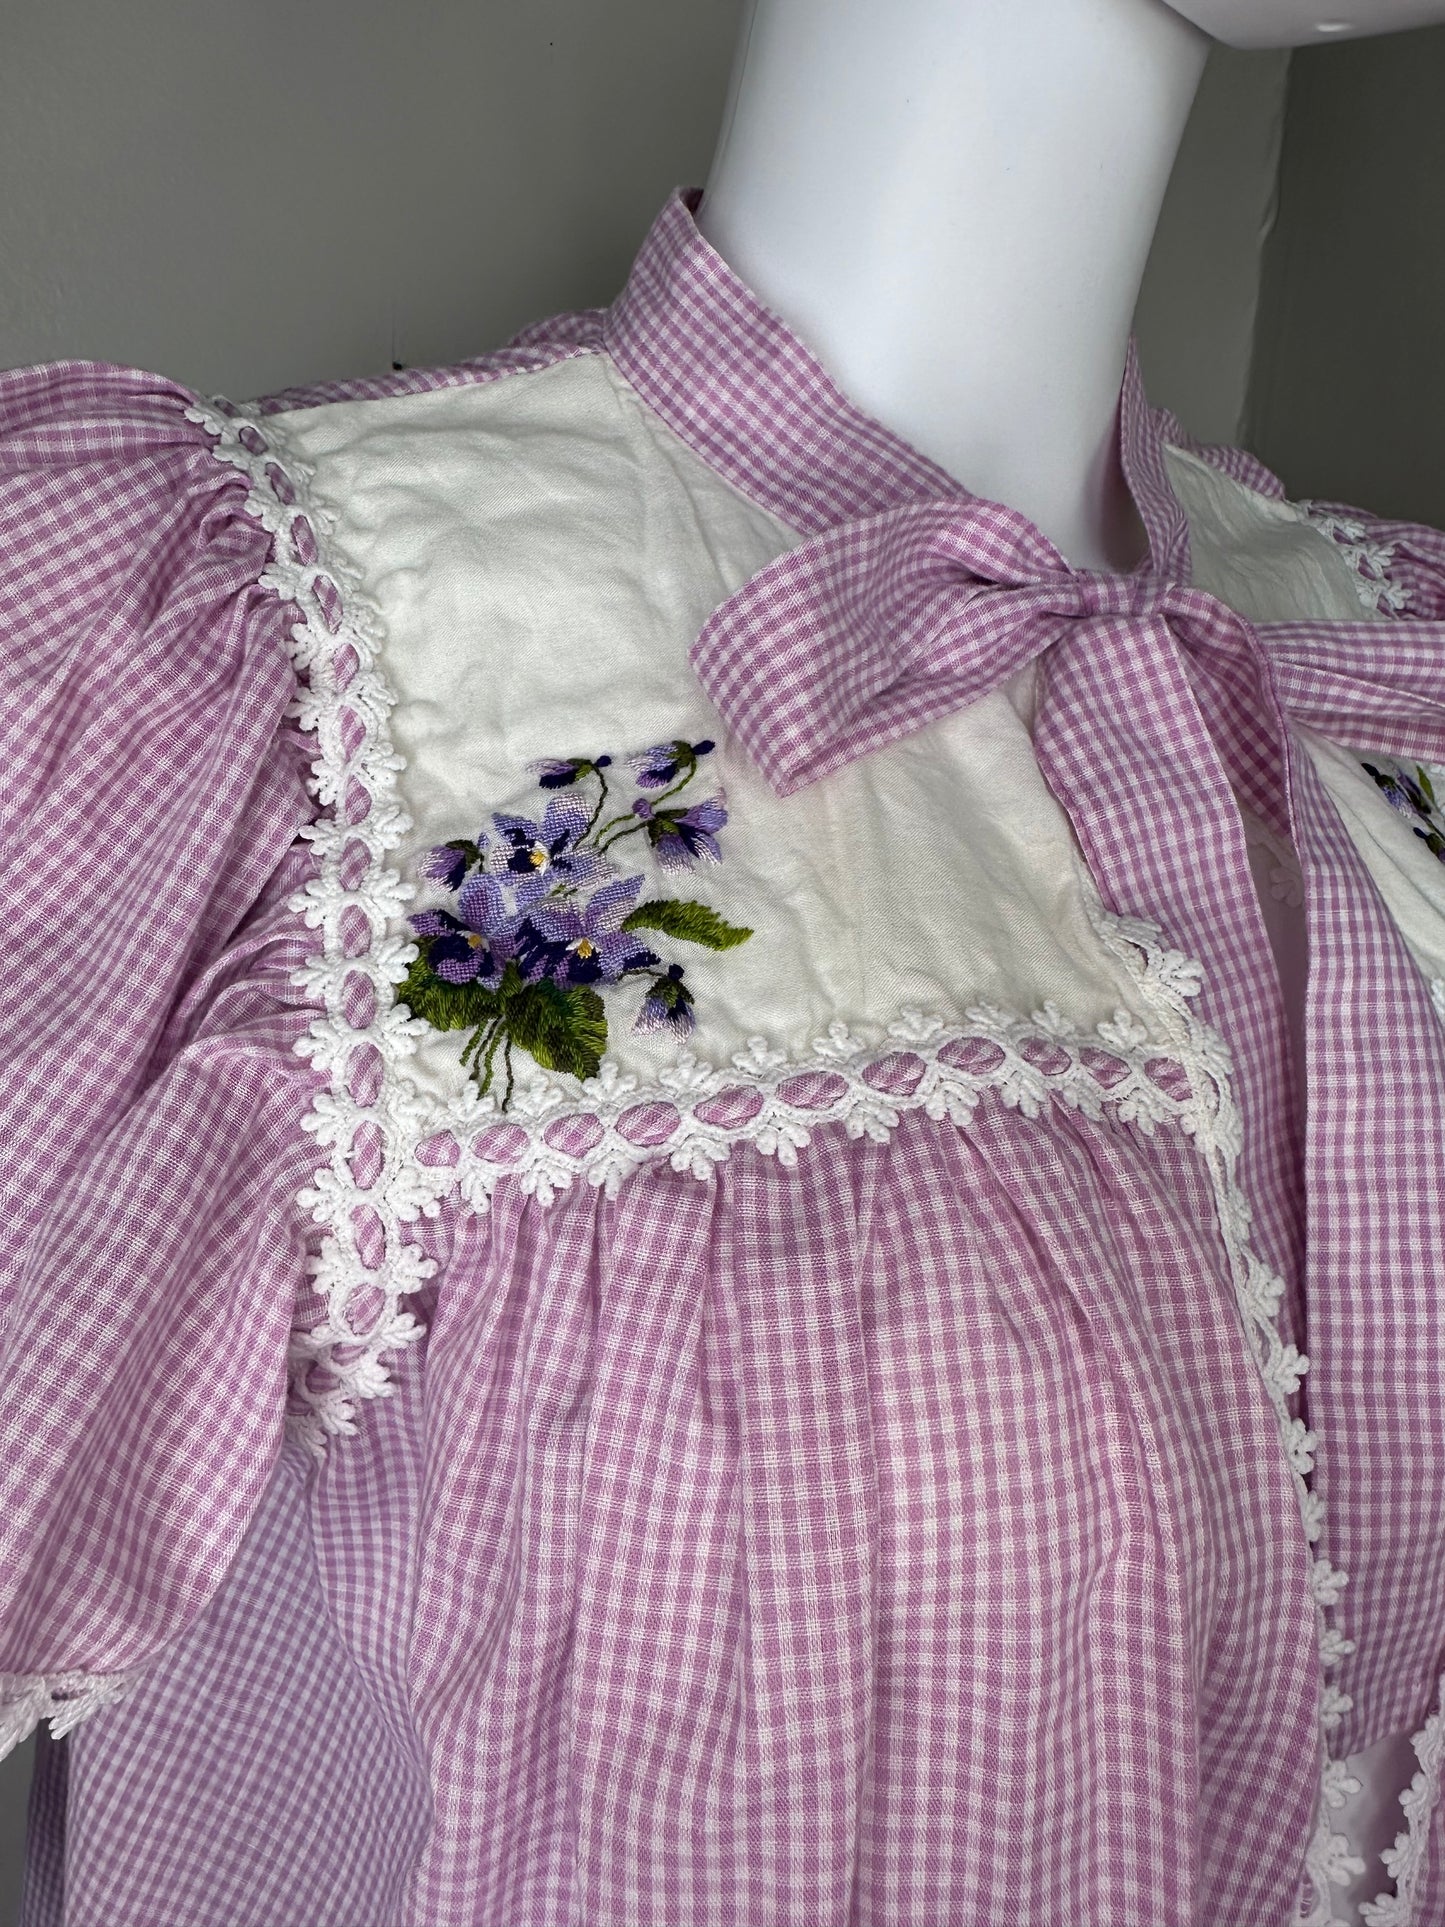 1970s/80s Purple Gingham Bed Jacket, Ellen Stein for Silvia Greenberg Size S/M, Floral Embroidery